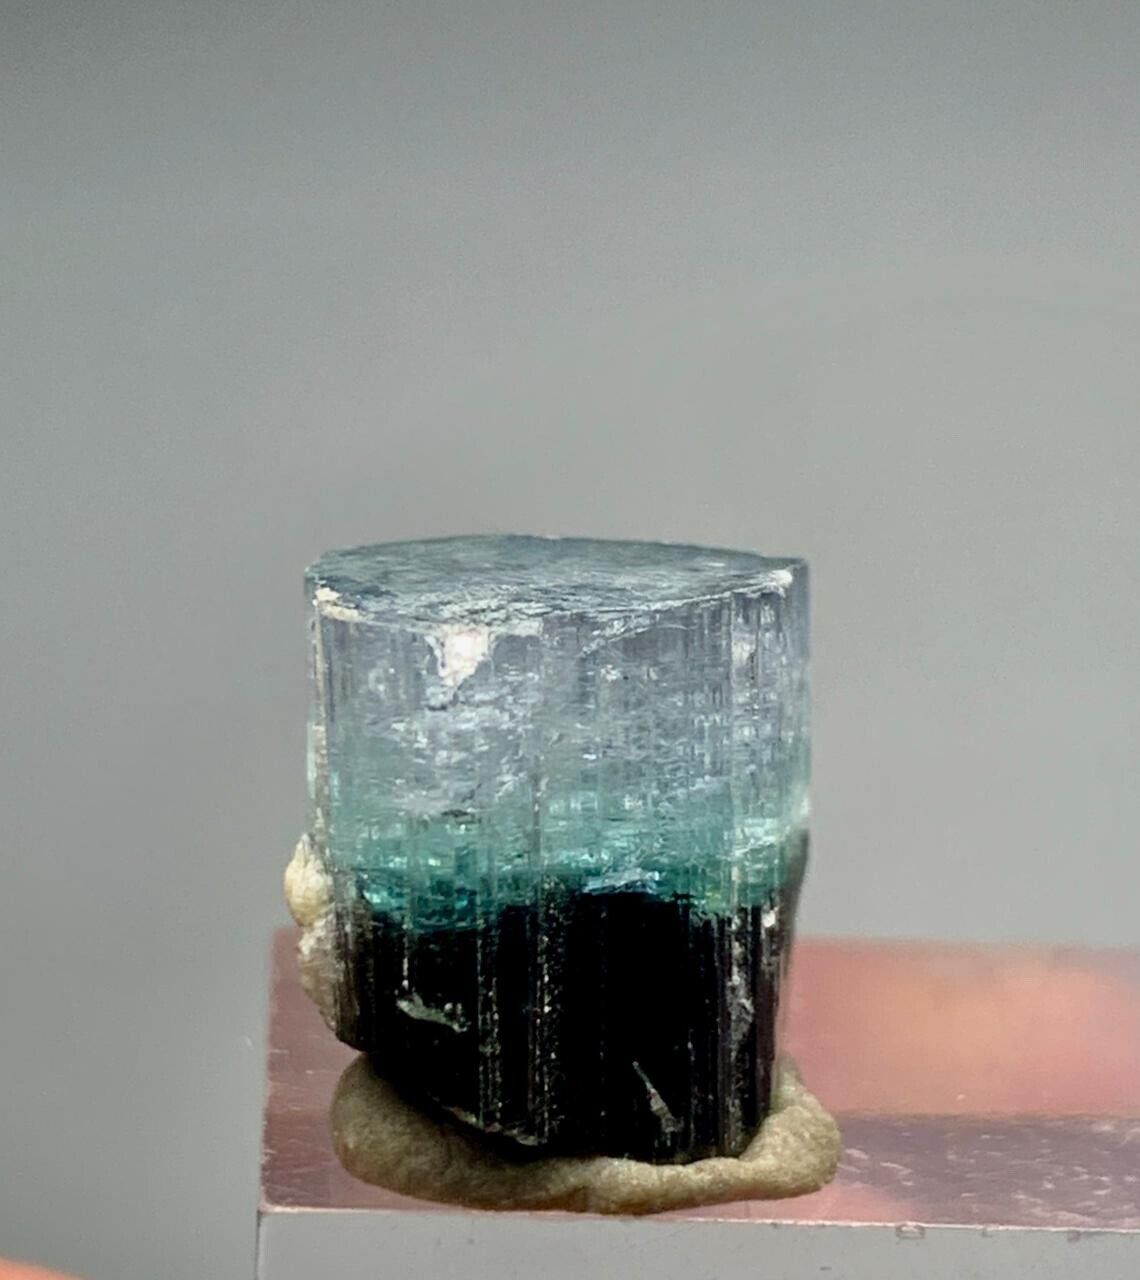 13 Cts Blue cap Tourmaline Crystal From Pakistan